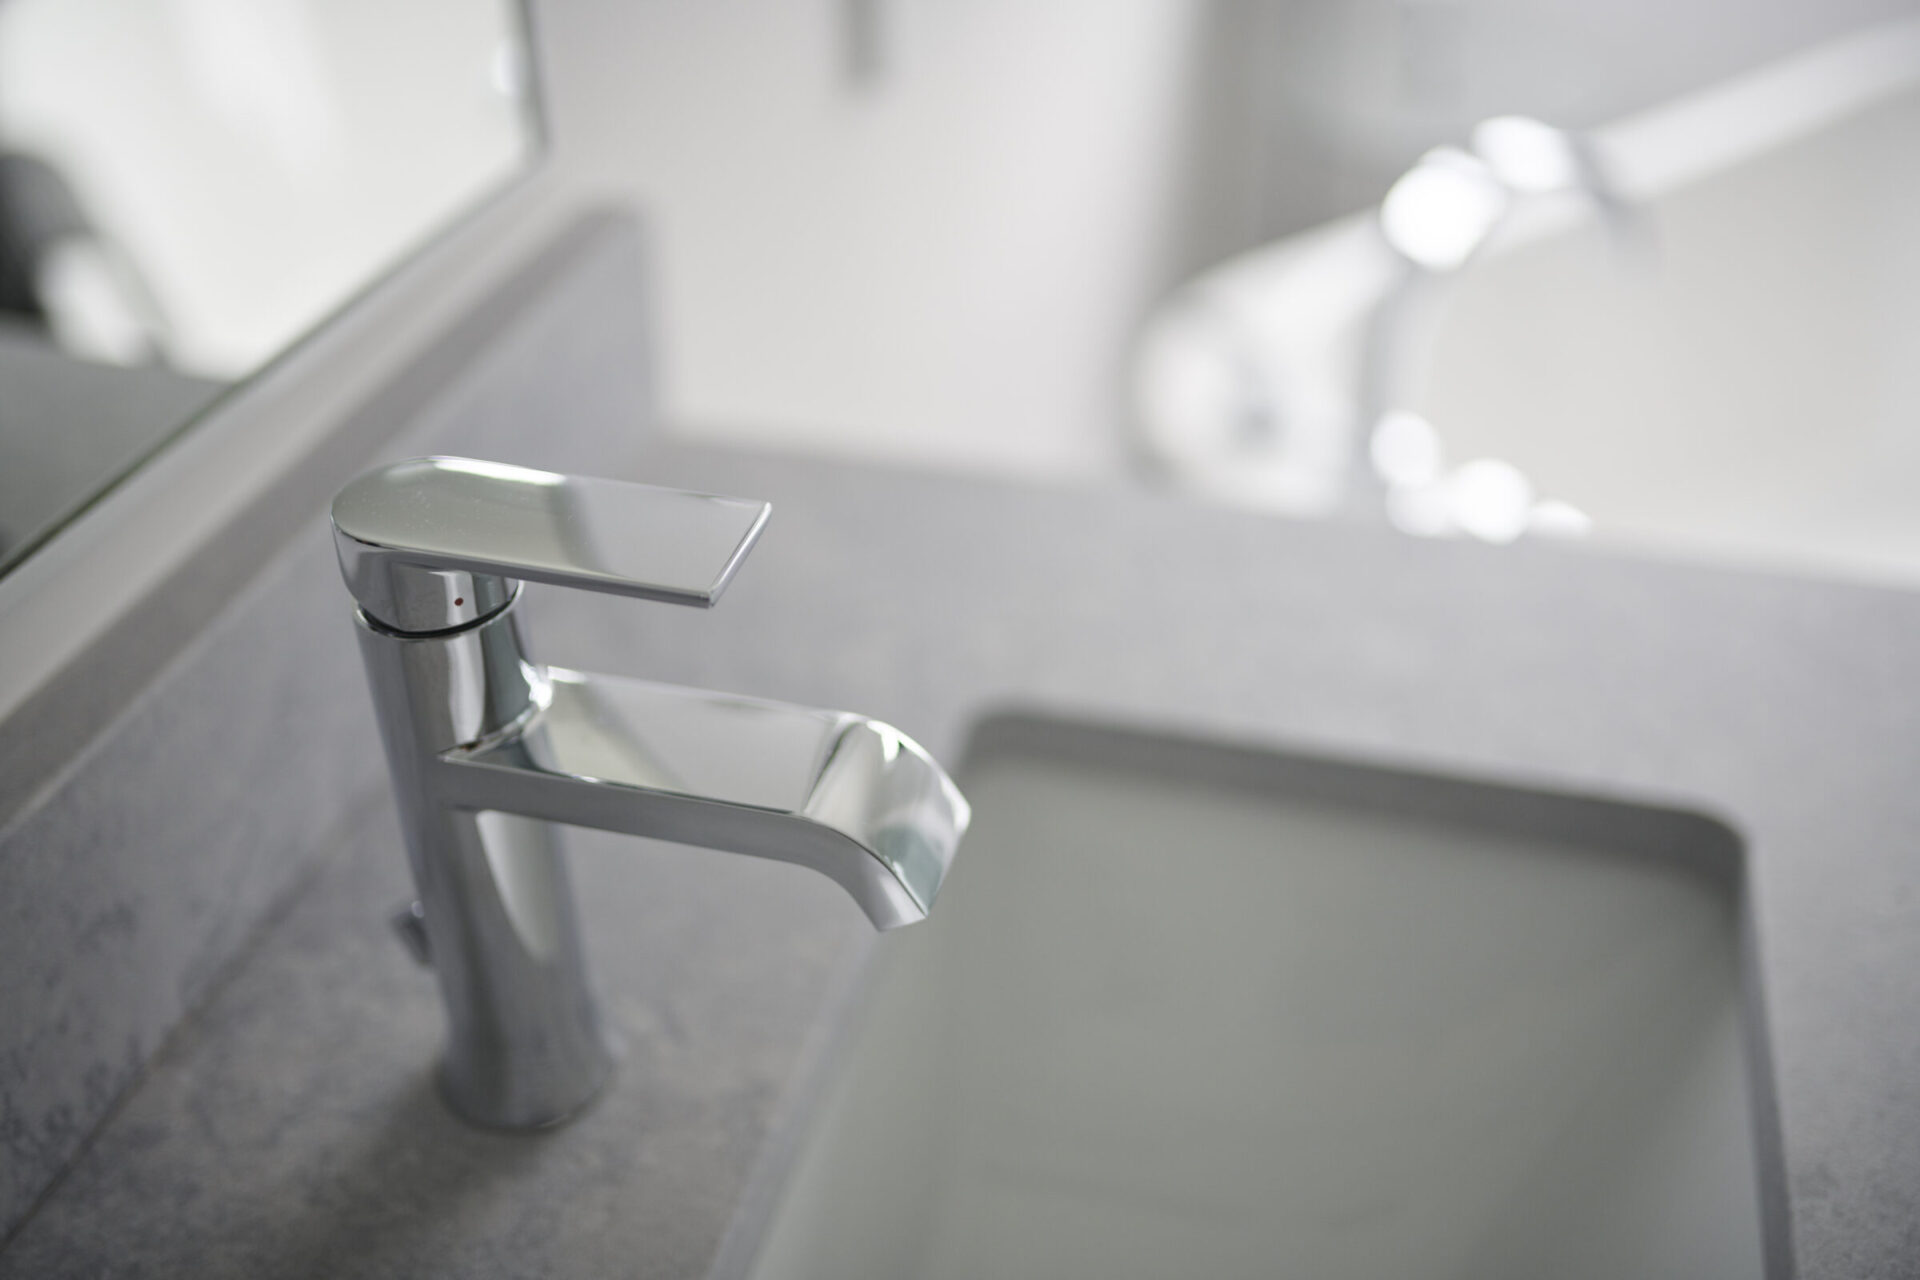 A modern bathroom sink with a sleek, metallic faucet. The countertop is gray, and the blurred reflection in the mirror is seen in the background.